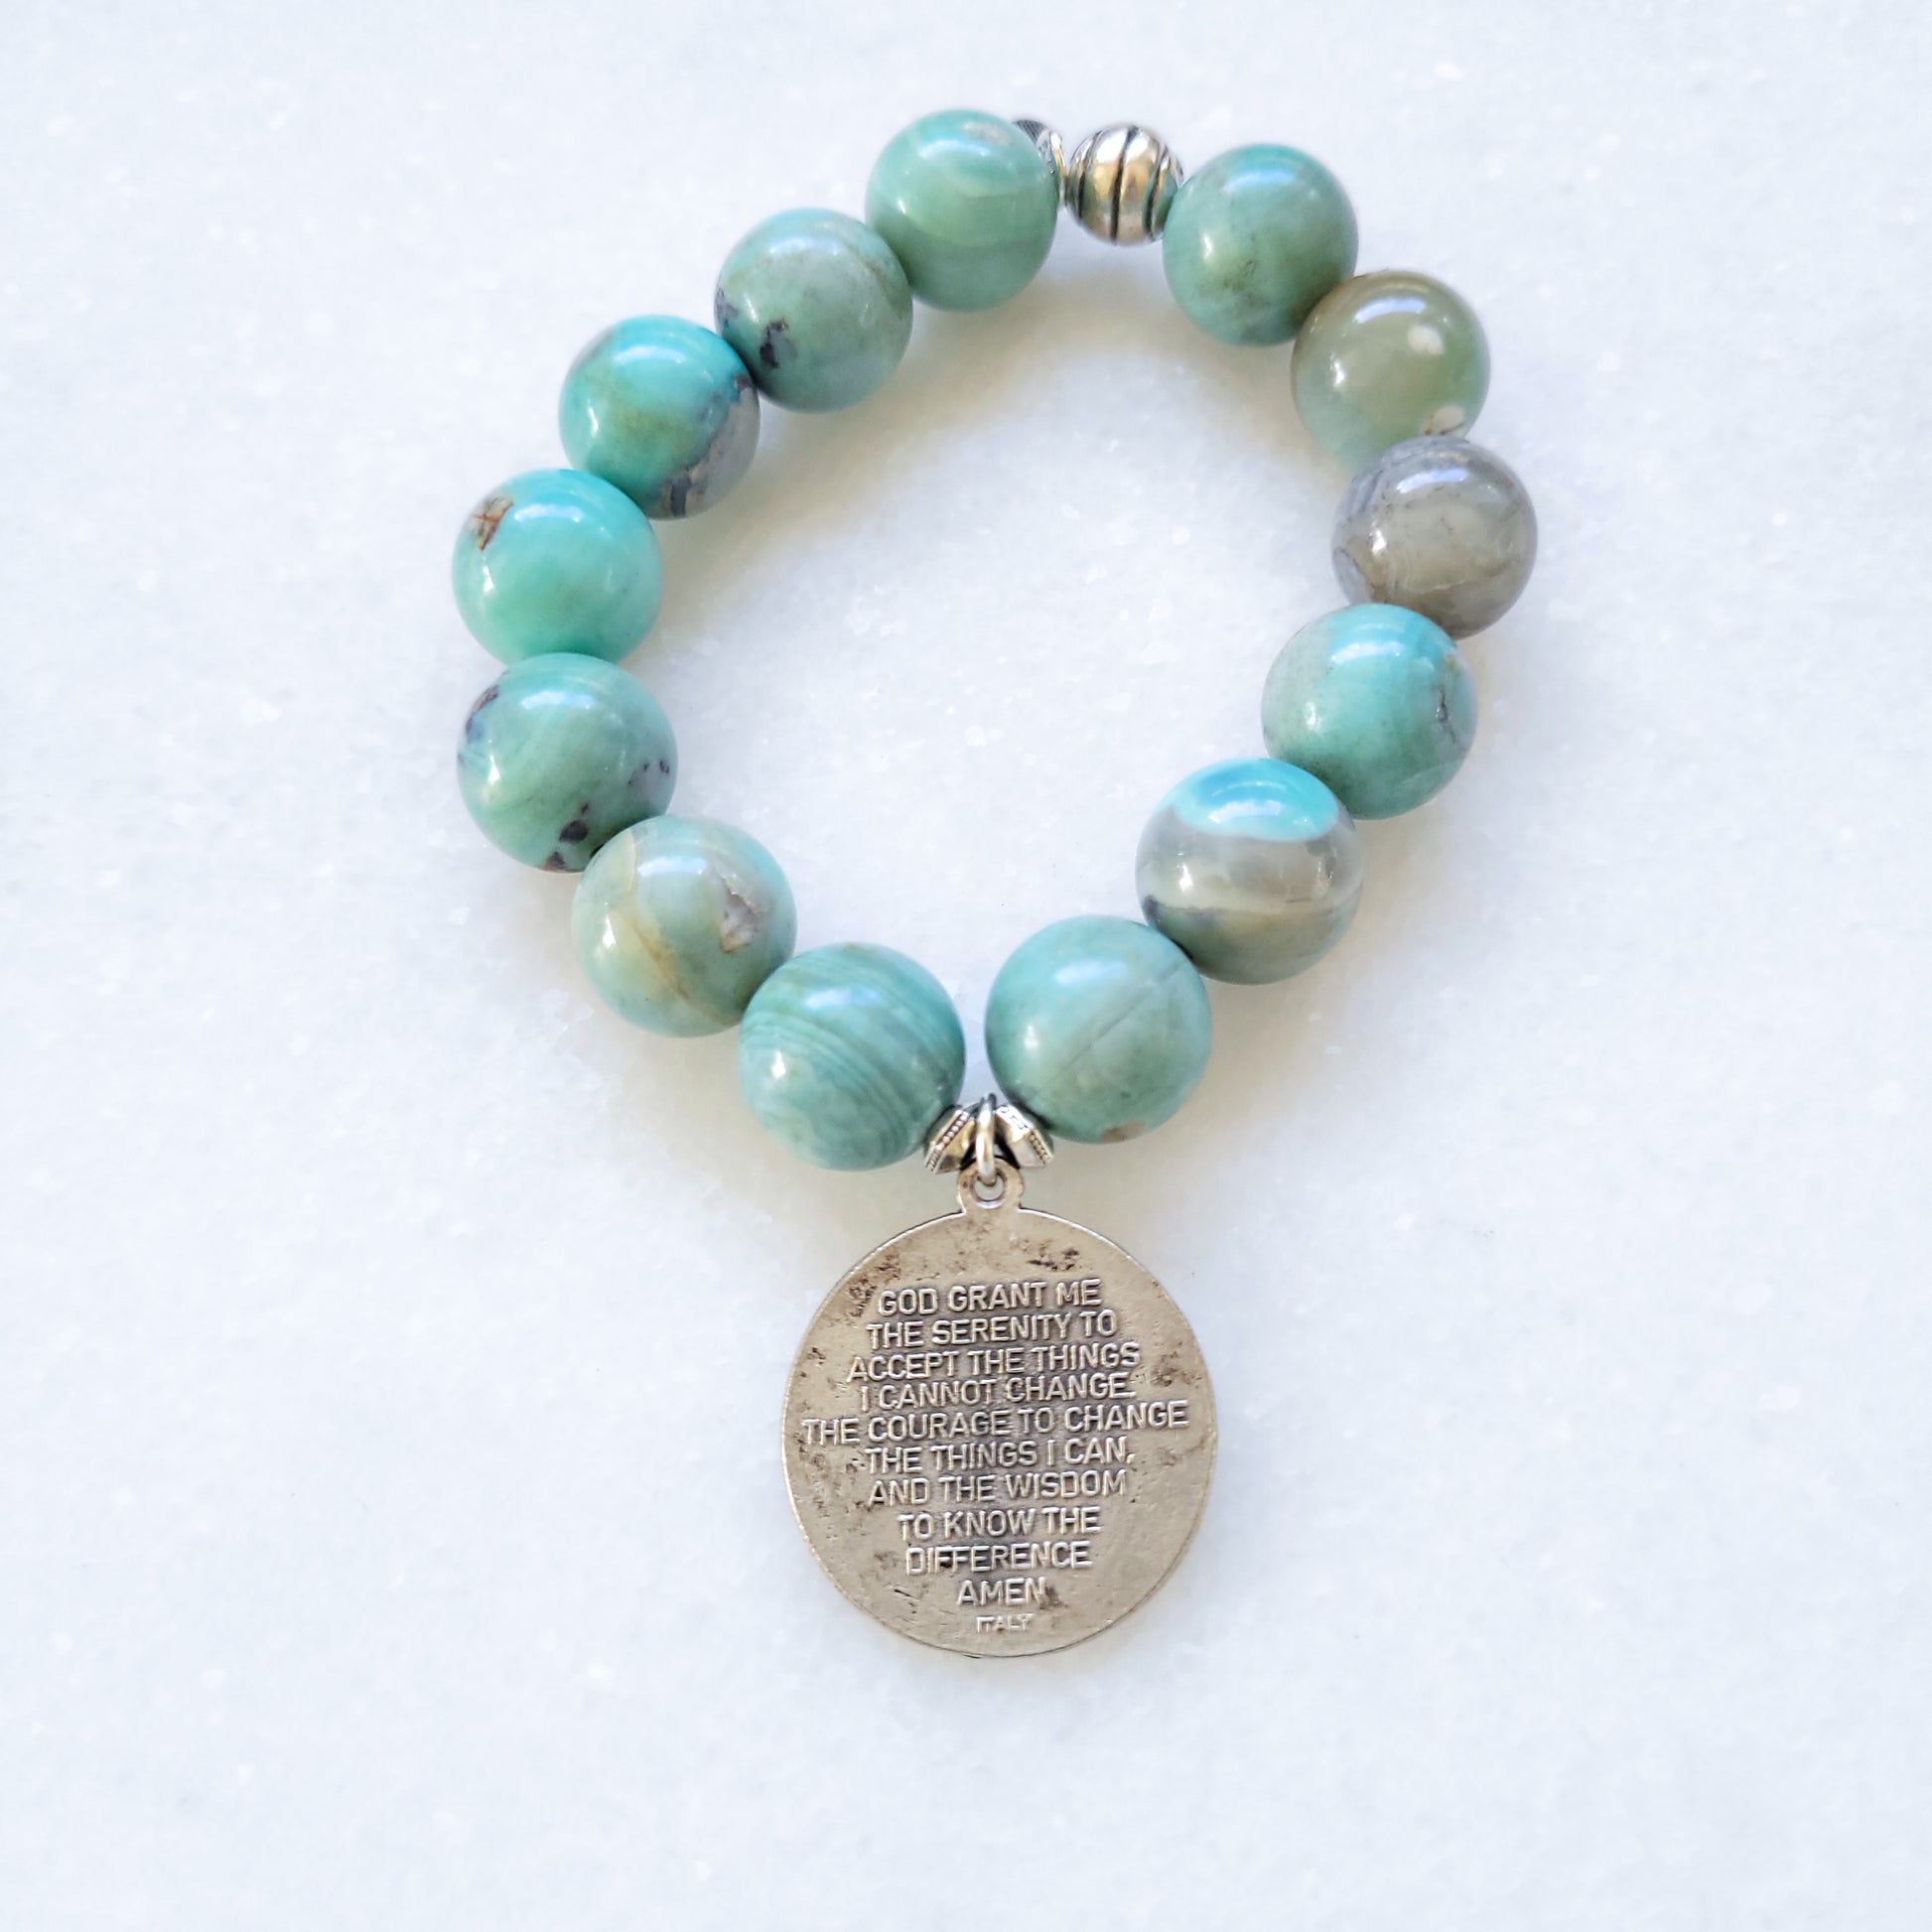 Turquoise 12mm Beaded Bracelet with Praying Hands Medal & Serenity Prayer - Afterlife Jewelry Designs